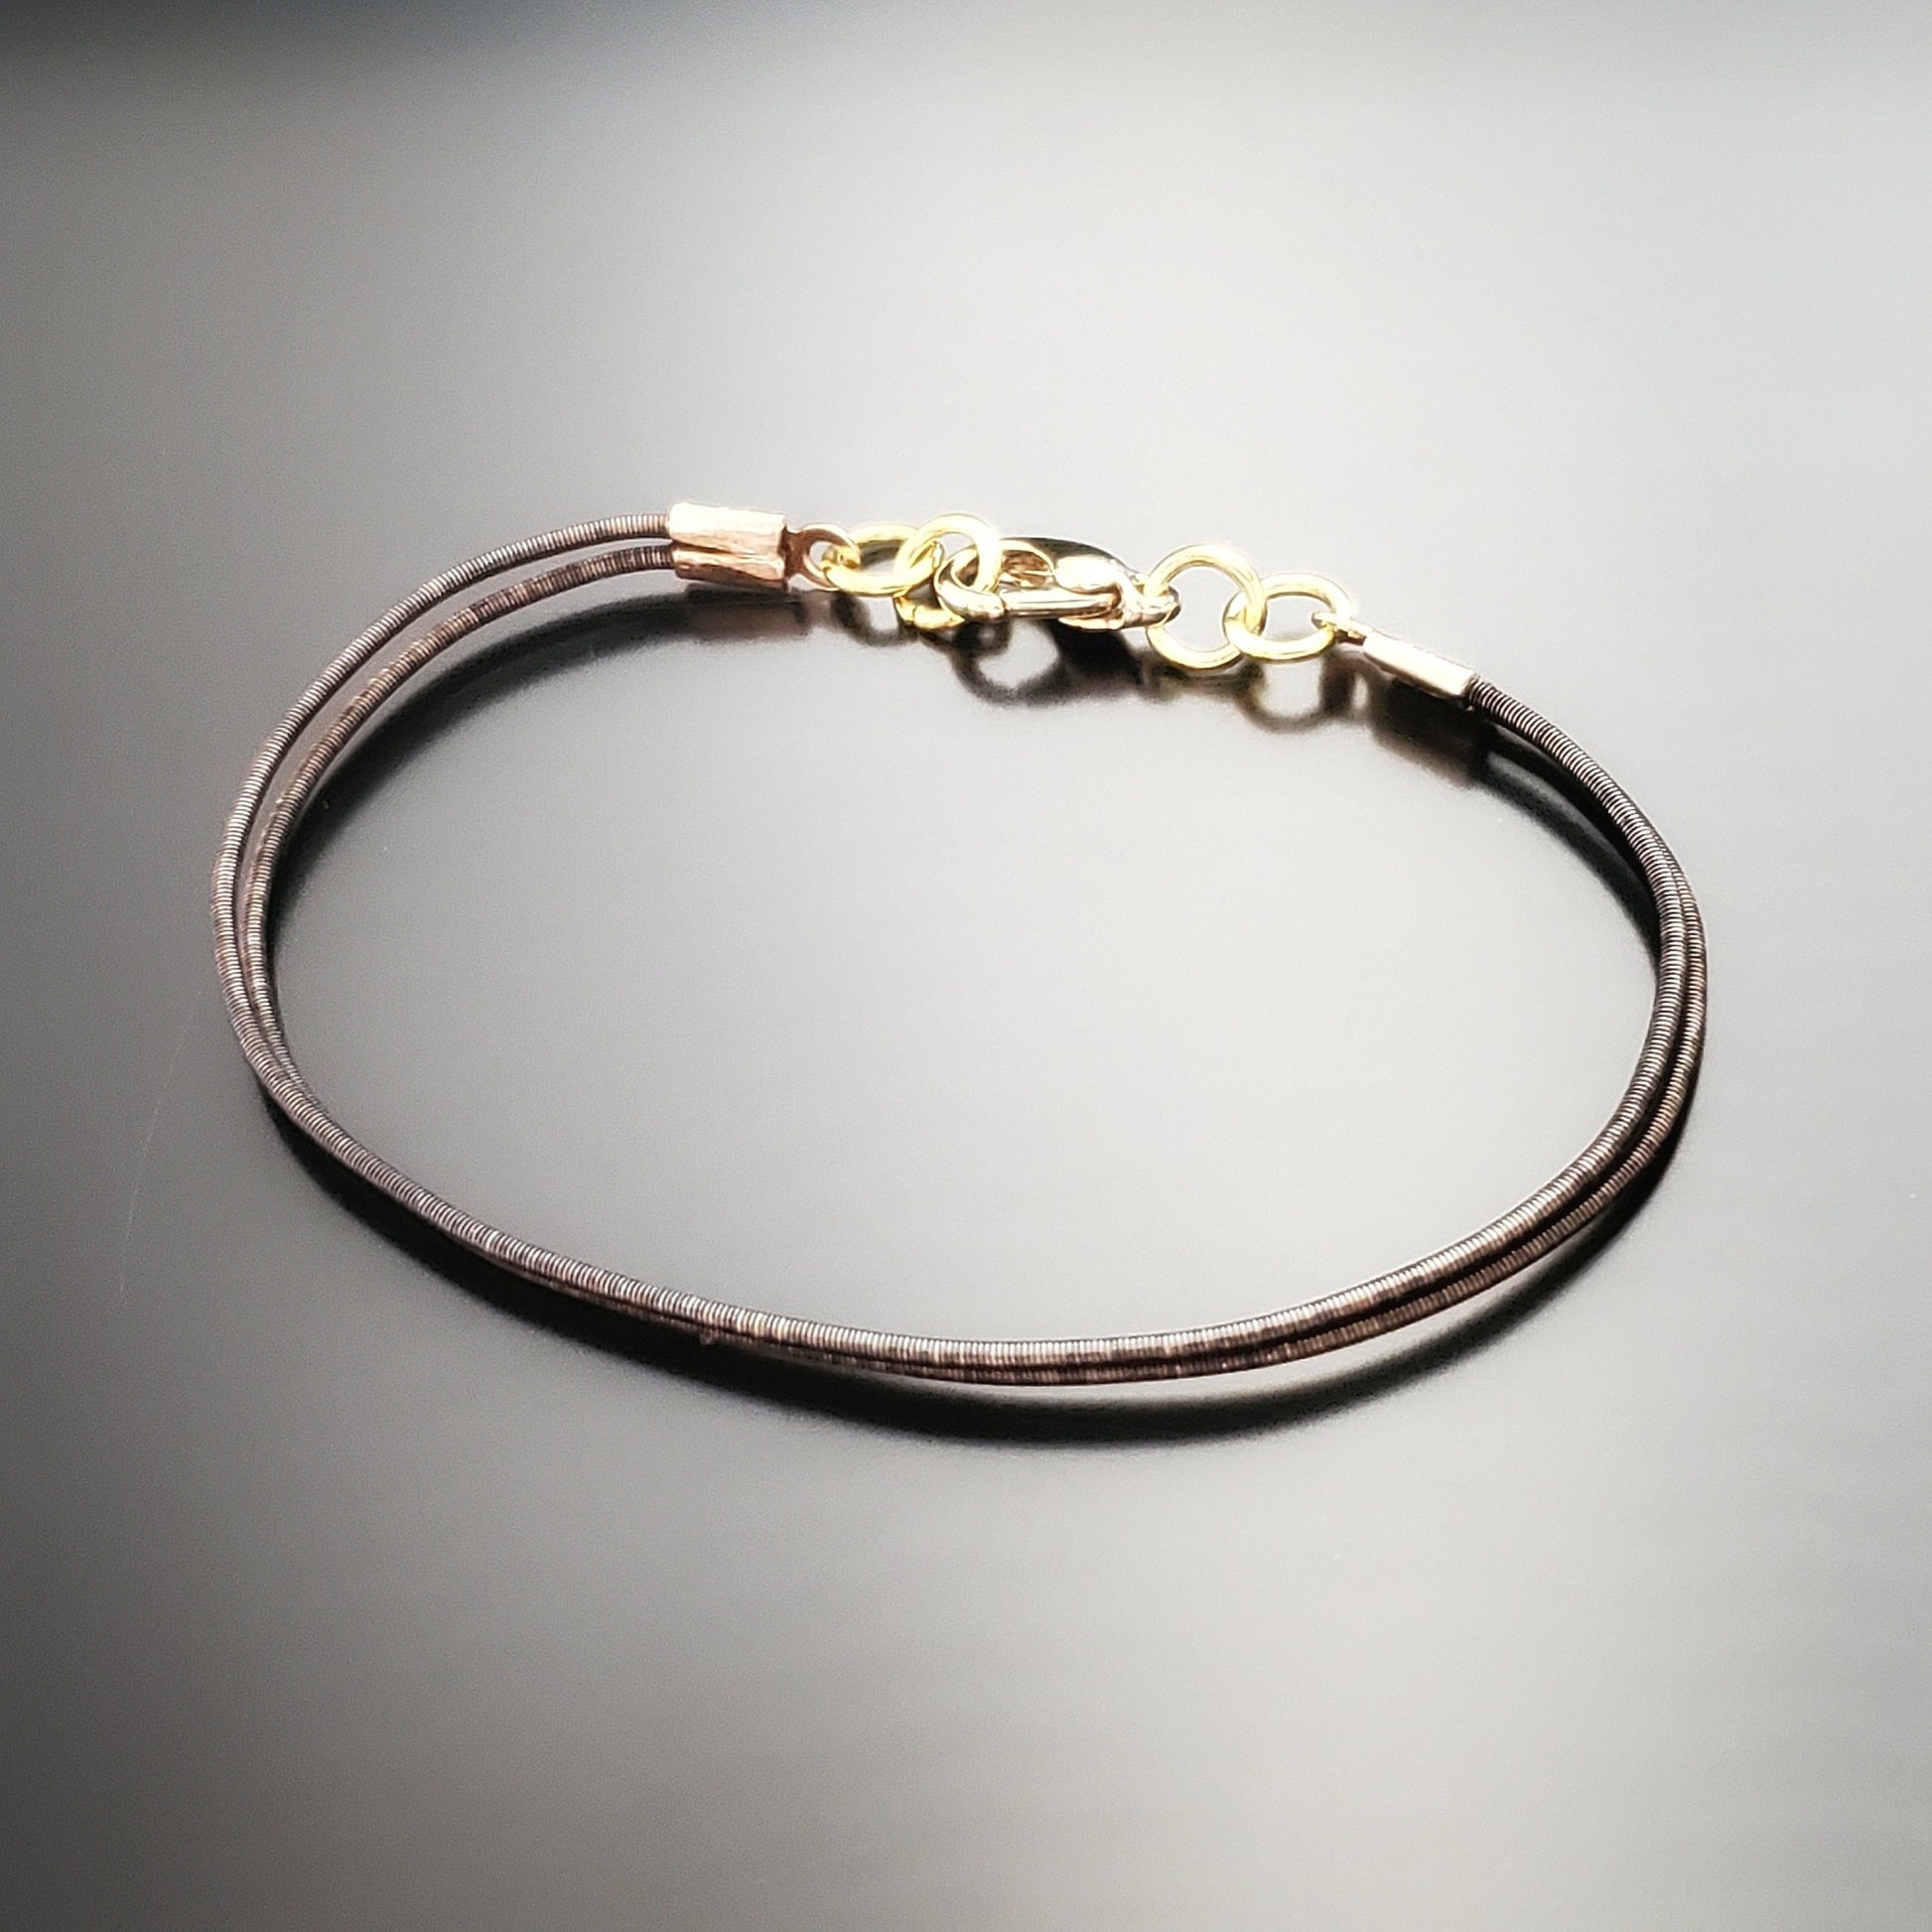 brown clasp style bracelet made from an upcycled harp string